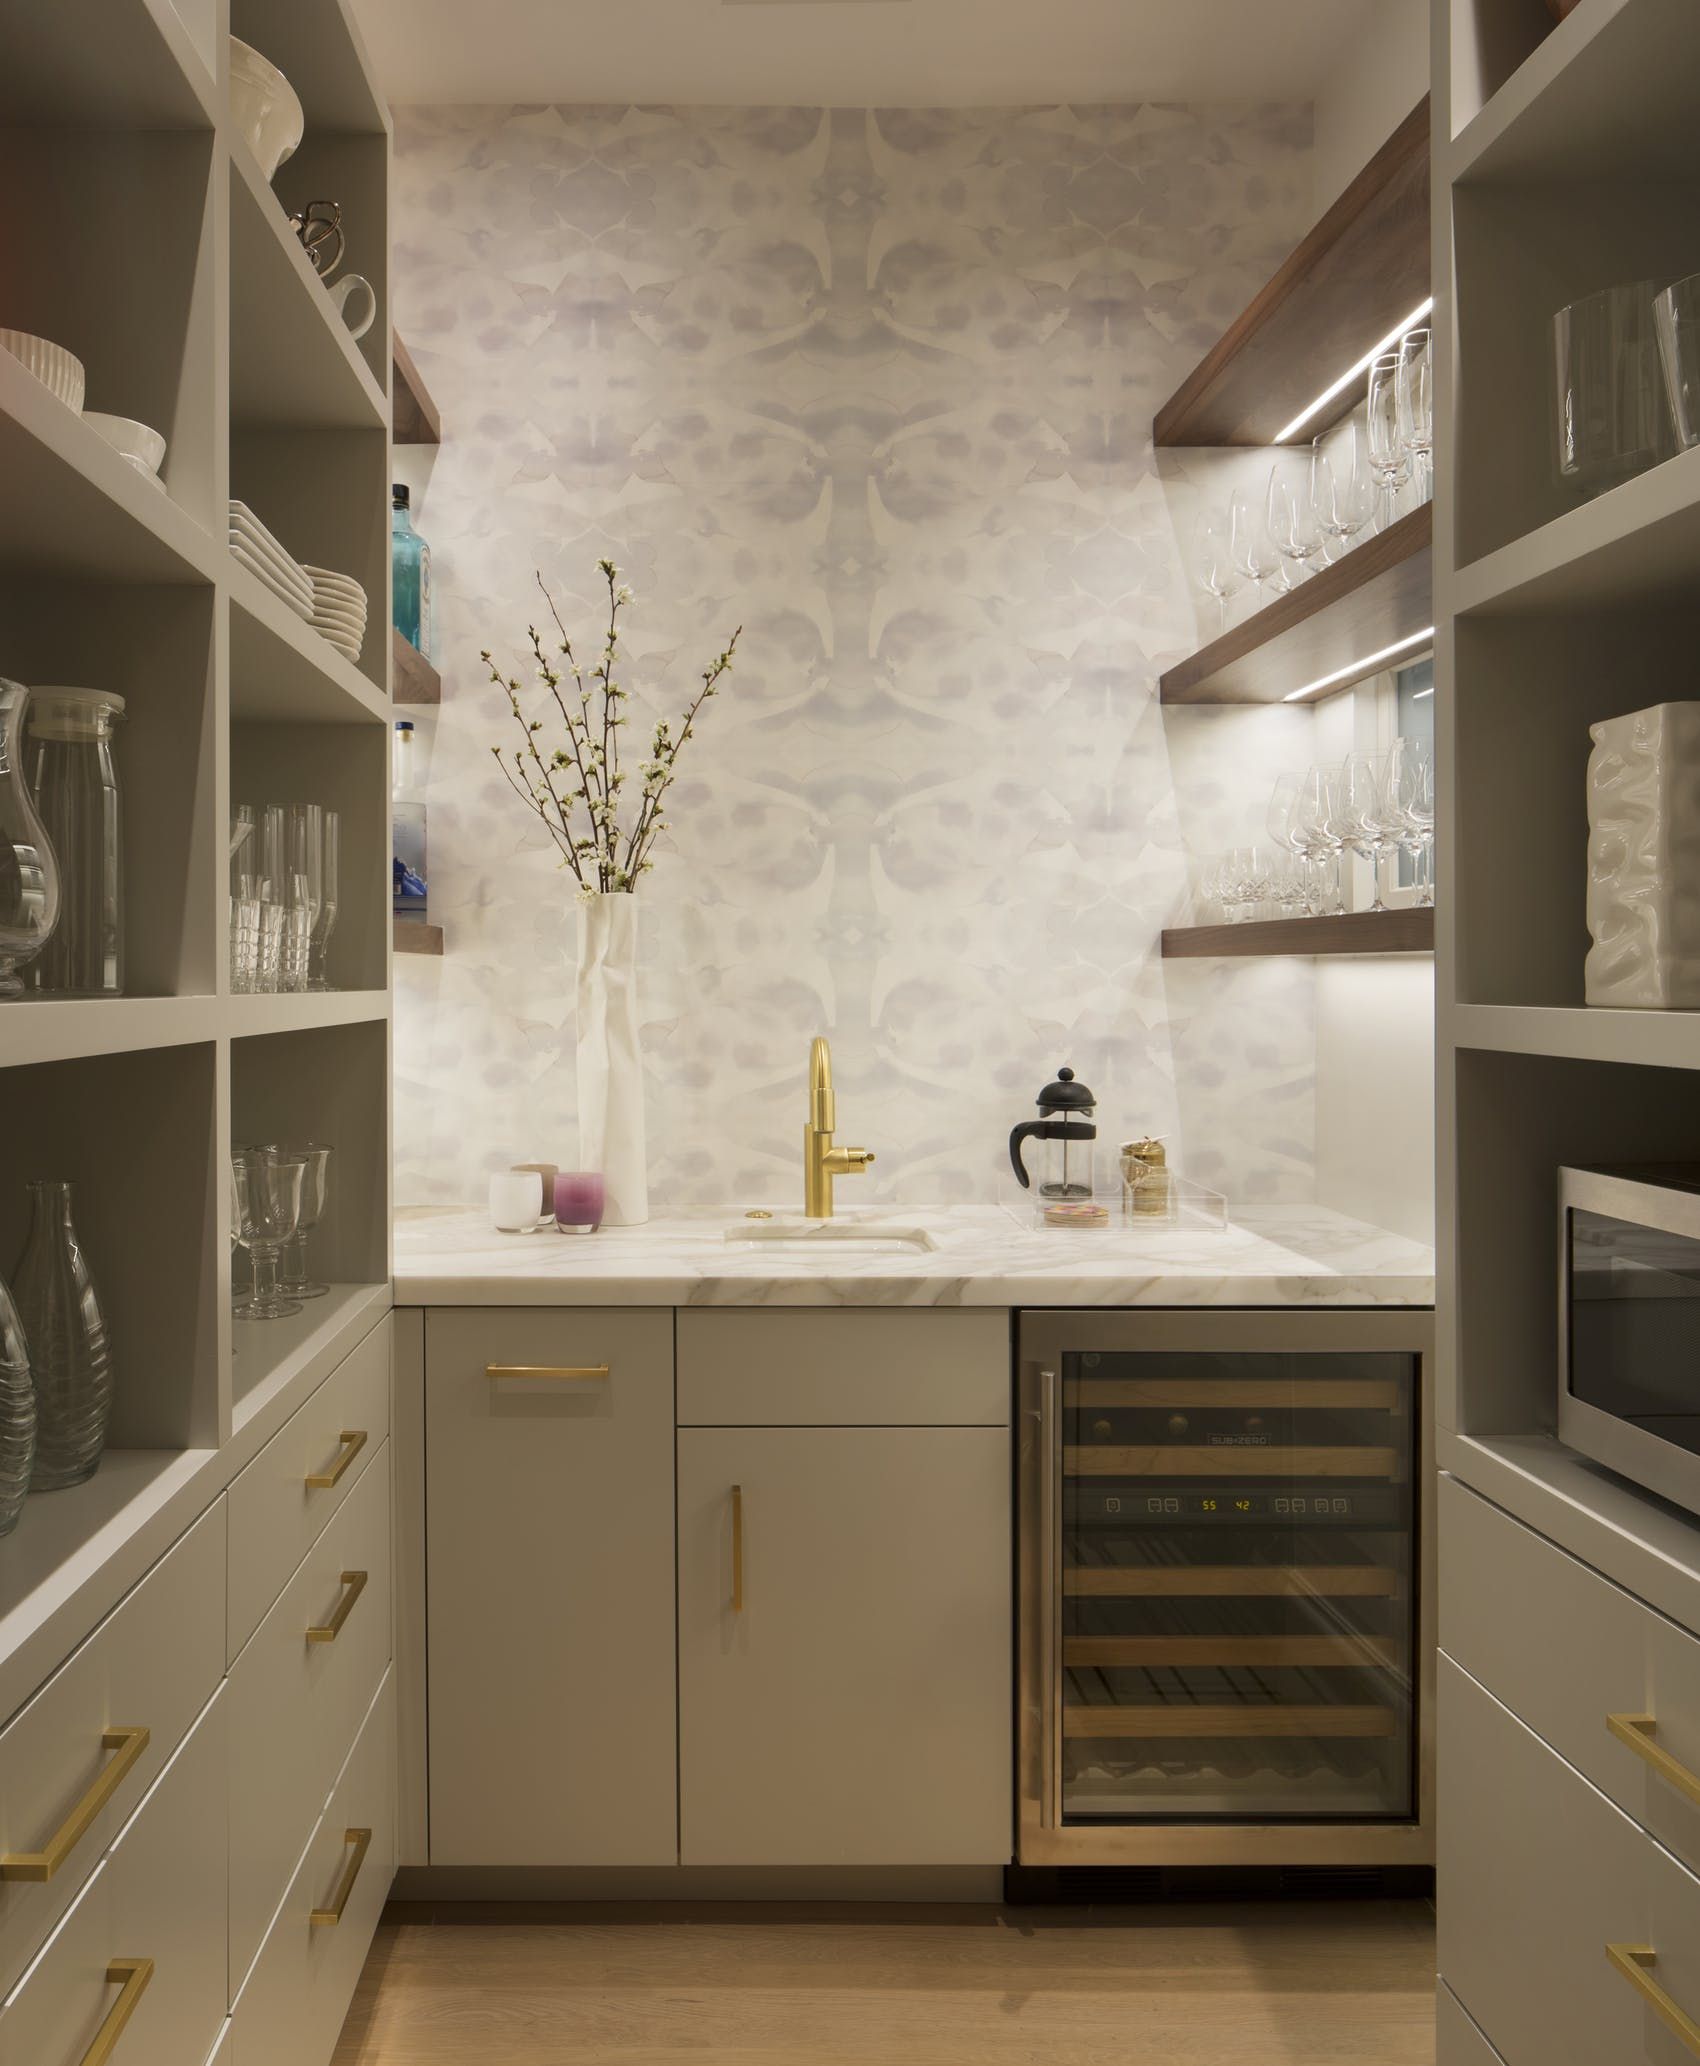 45 charming butler's pantry ideas - what is a butler's pantry?